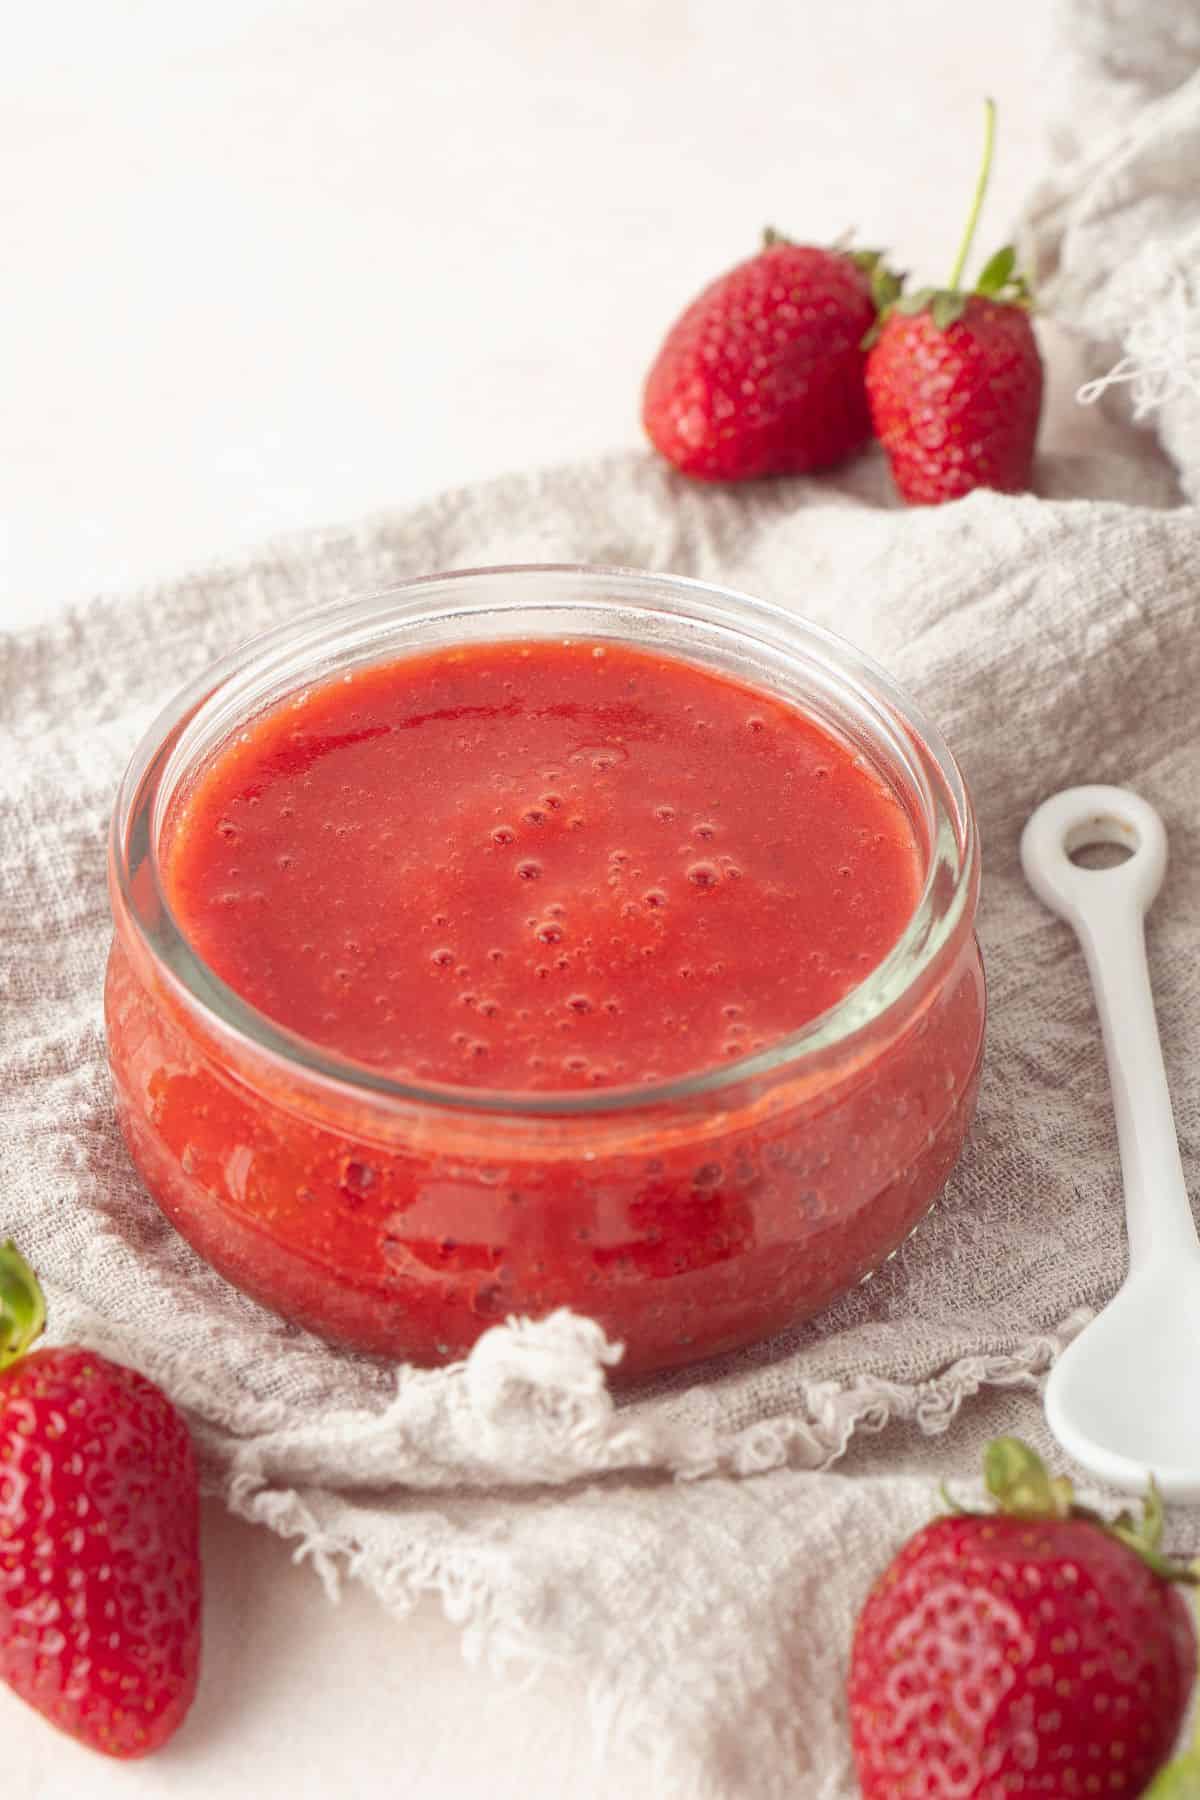 Small round glass dish of Strawberry Sauce, sitting on a cloth, with a white spoon and some strawberries around the edge.